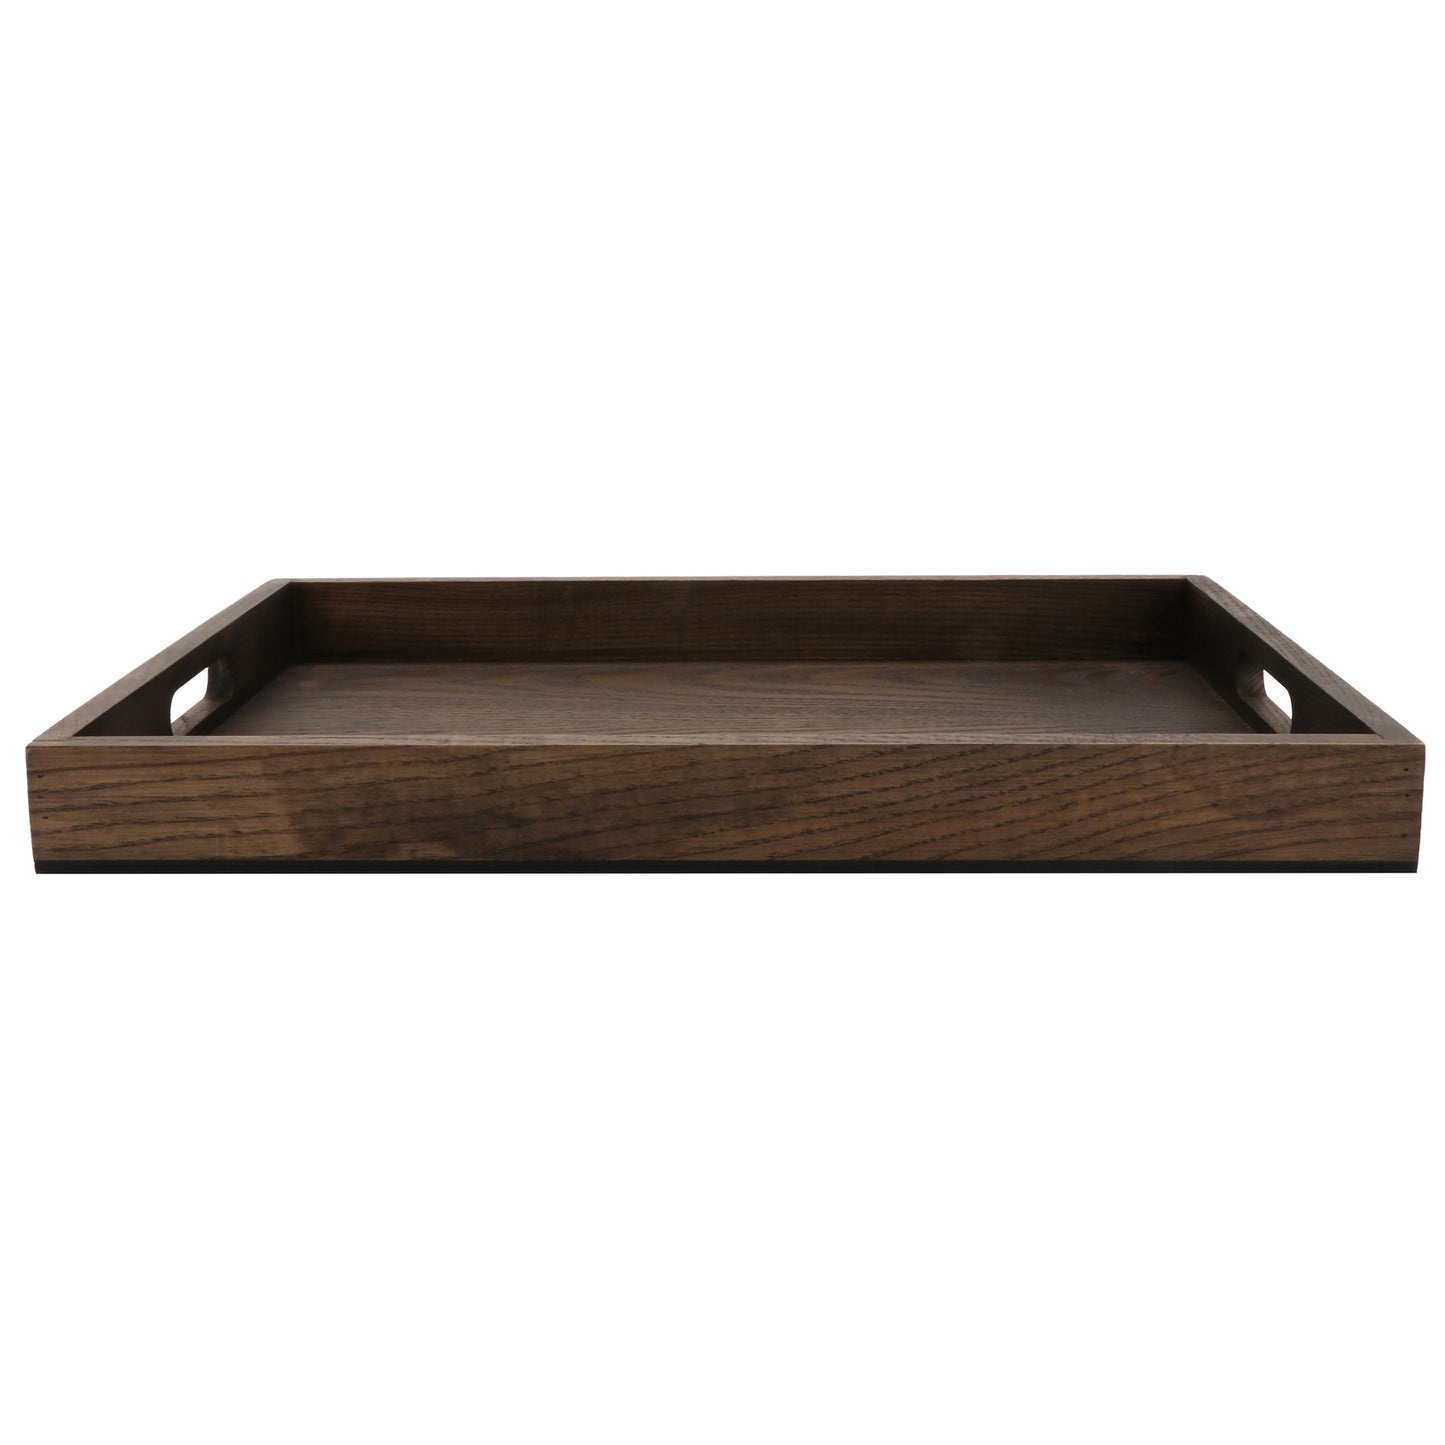 19.75" x 14.75" x 1.75" OD (19" x 14" ID), Wood Tap Root Tray, Grey Ash Color , With Handles